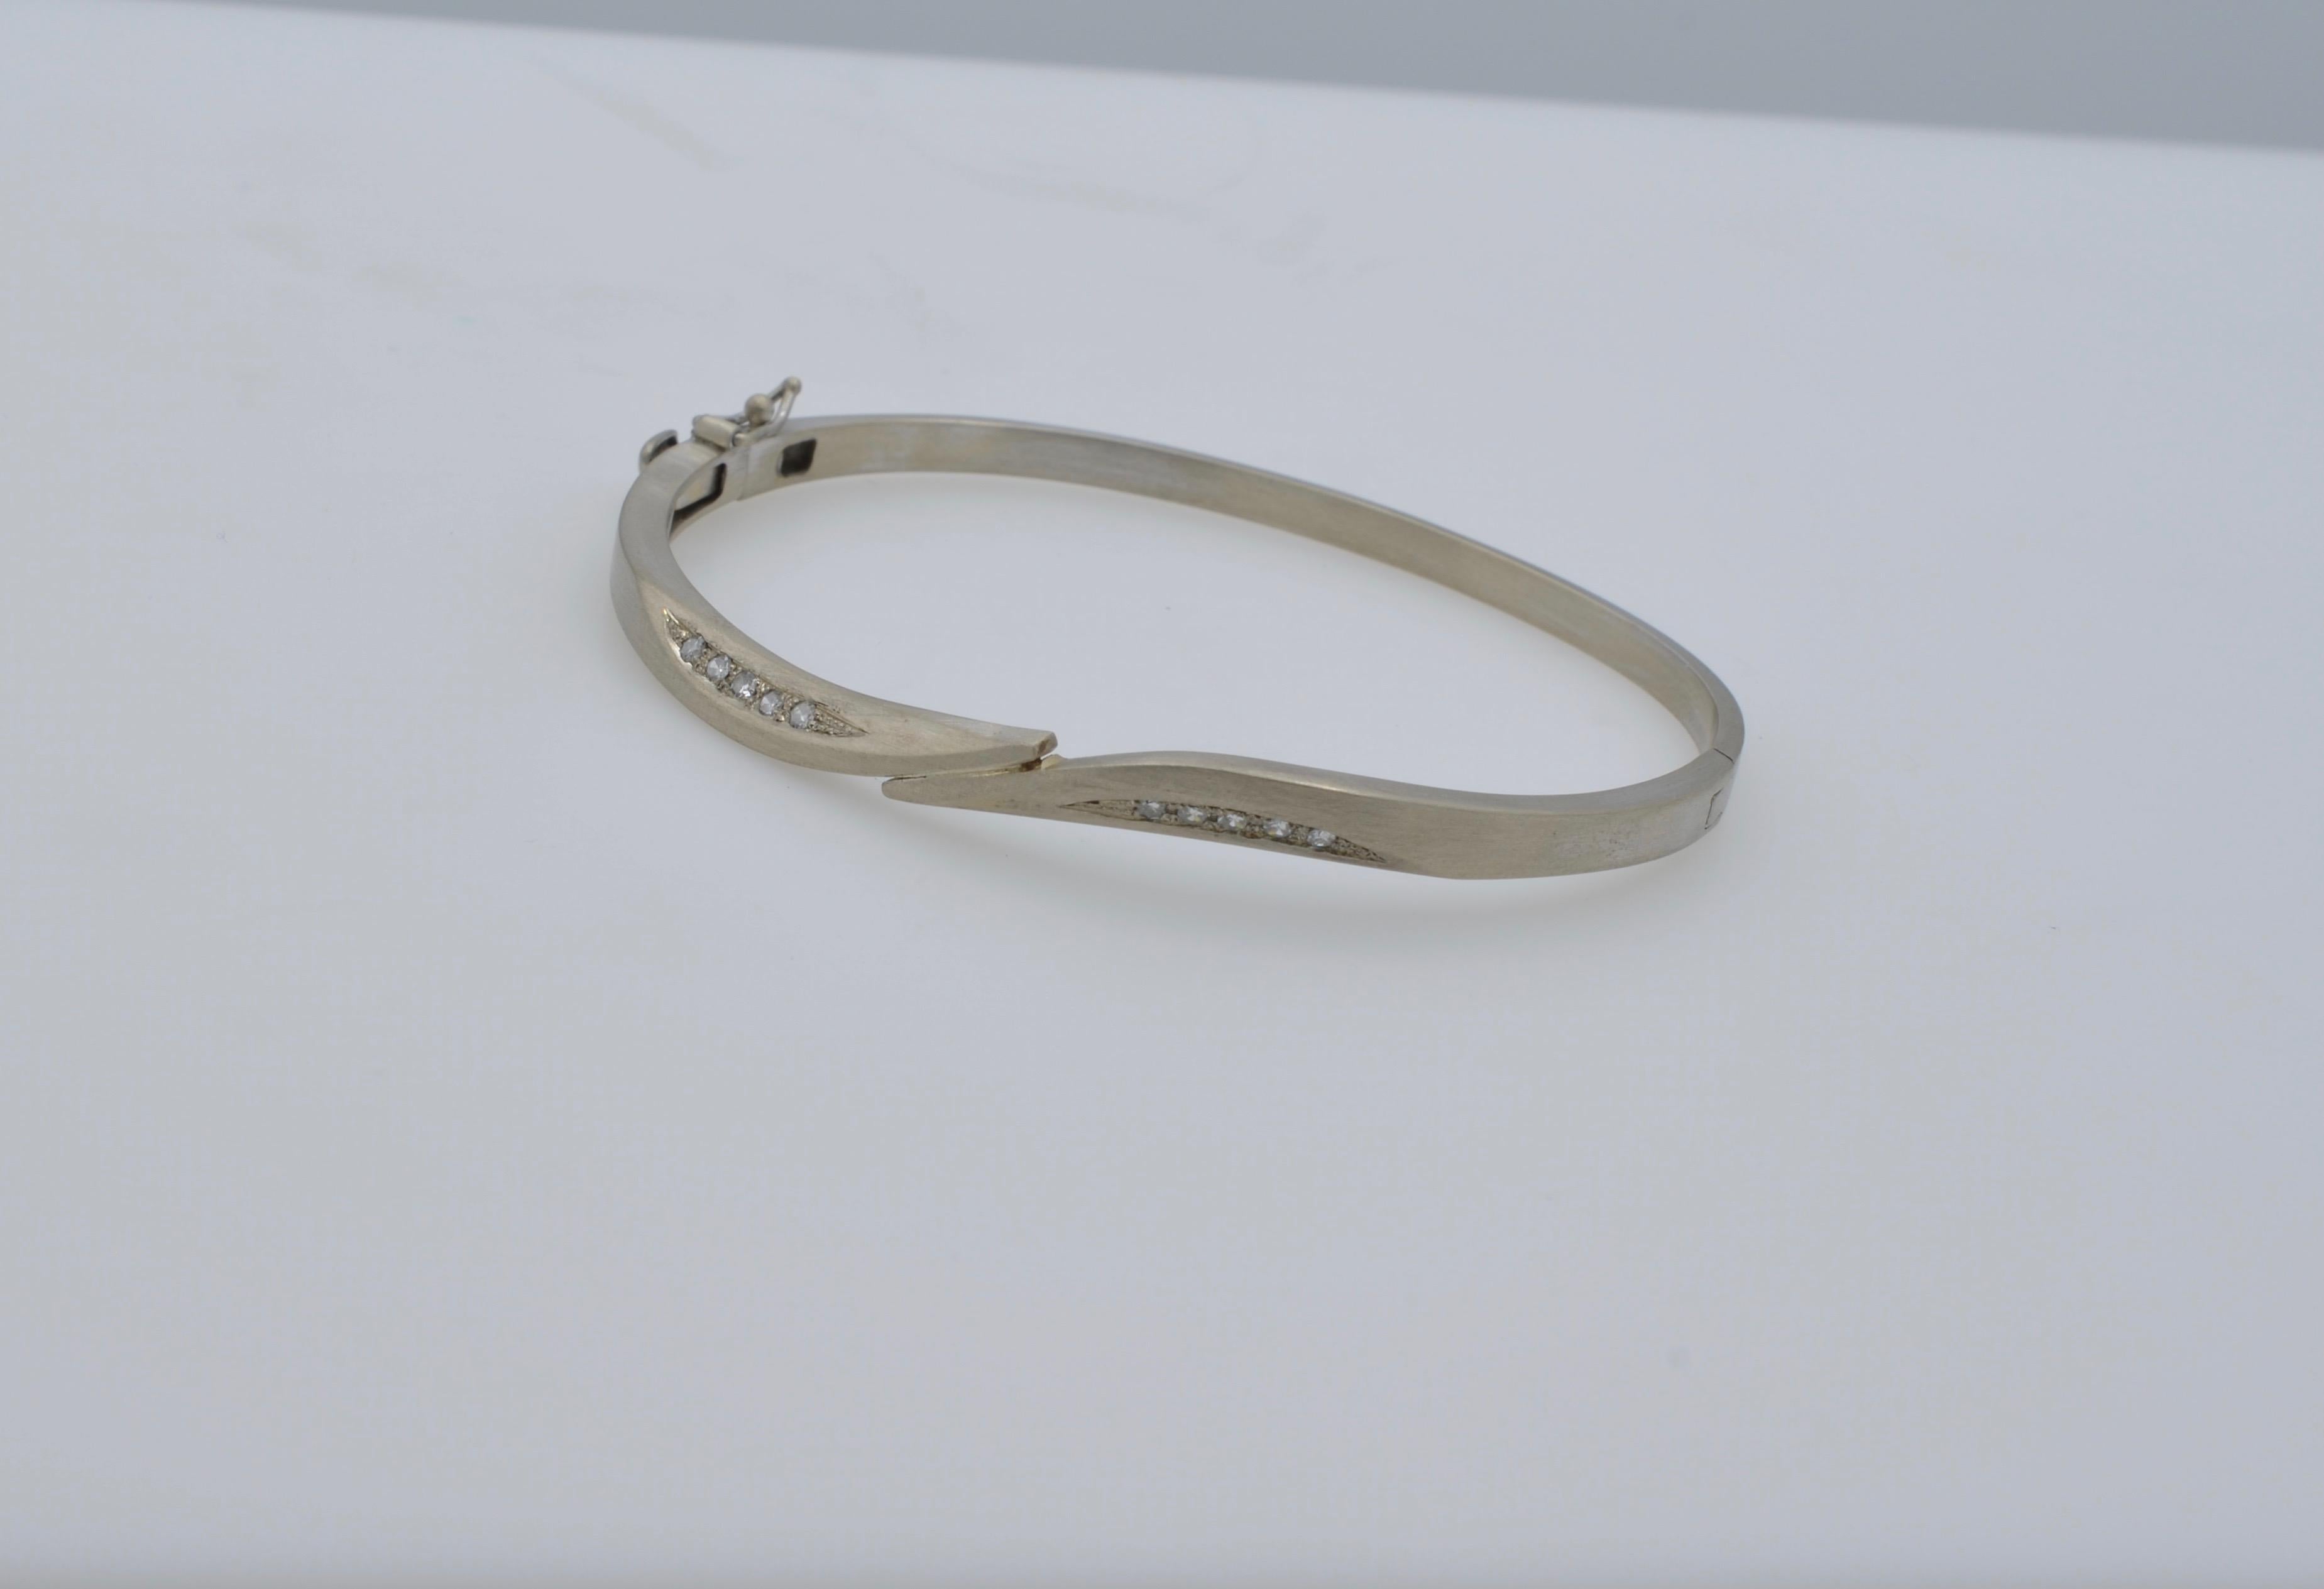 This white gold and diamond bangle is modern, sleek and sexy! The 'kissing' on the center frames the five diamonds ( aprox 0.20 tw ) beautifully set in a 'wave' on each side. It is a lovely design that is timeless and special. The closure has a very